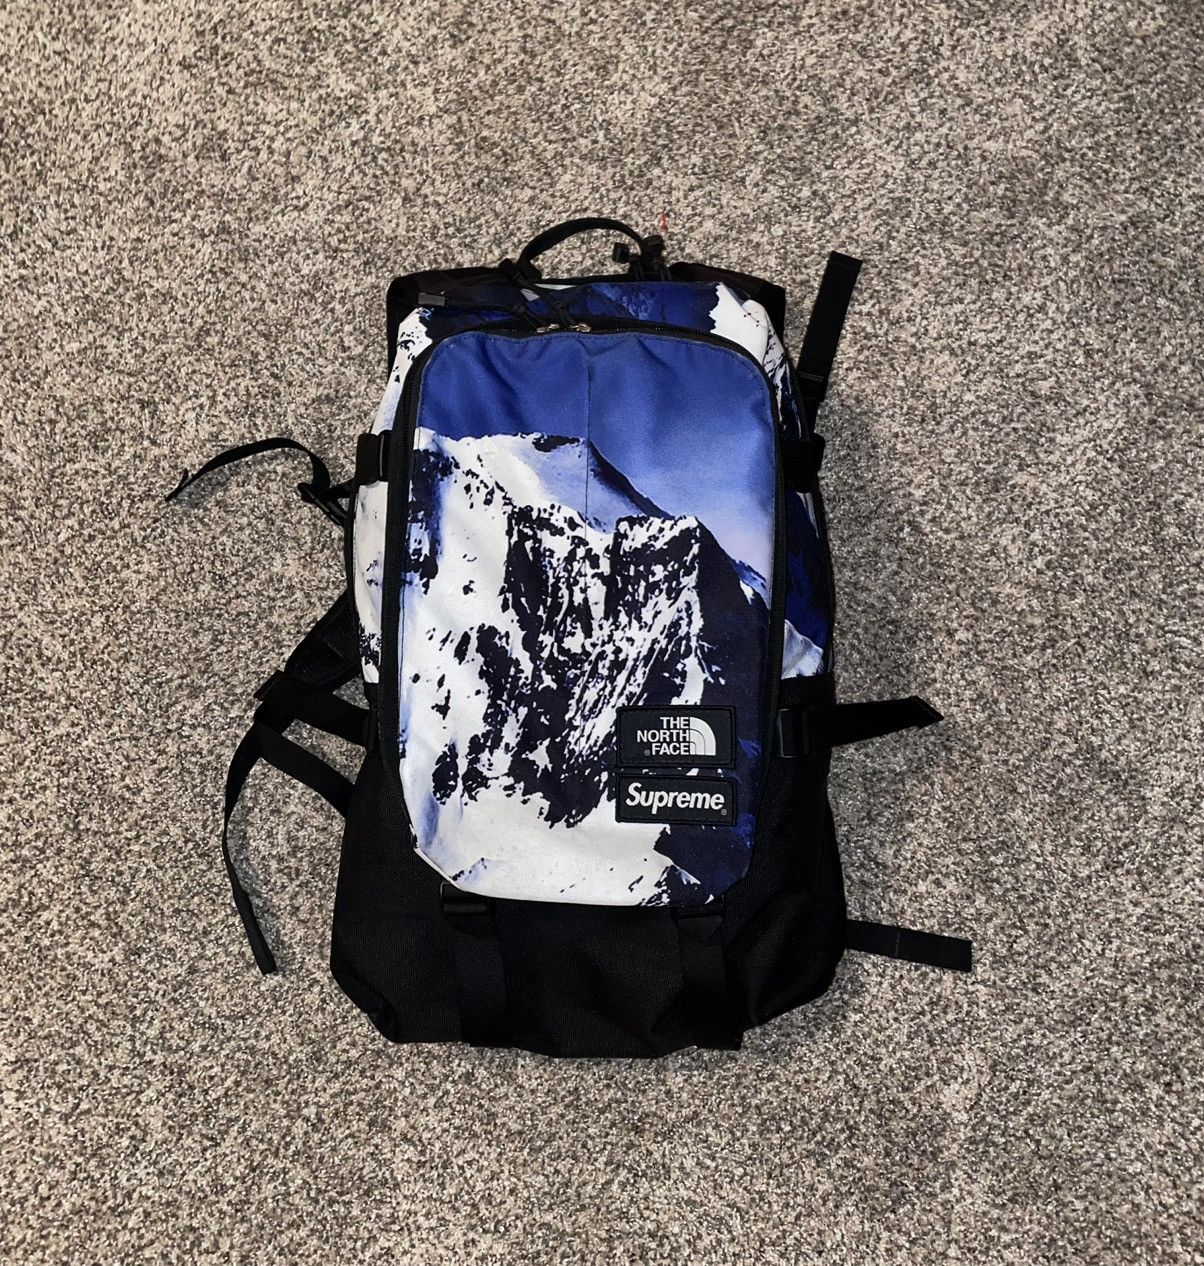 Supreme Supreme north face mountain expedition backpack | Grailed